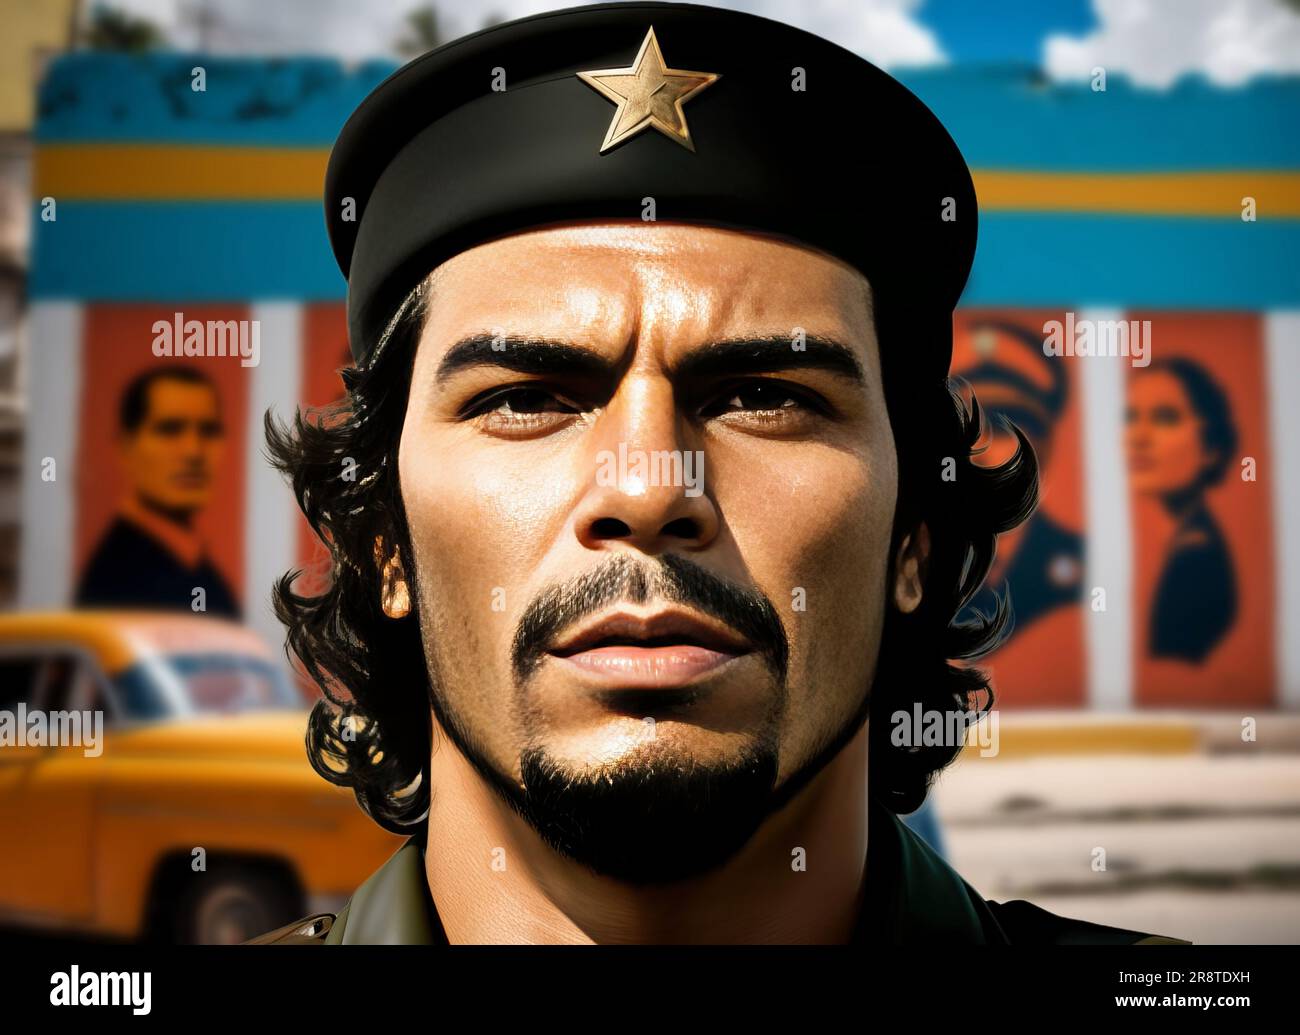 Che guevara Stock Vector Images - Alamy